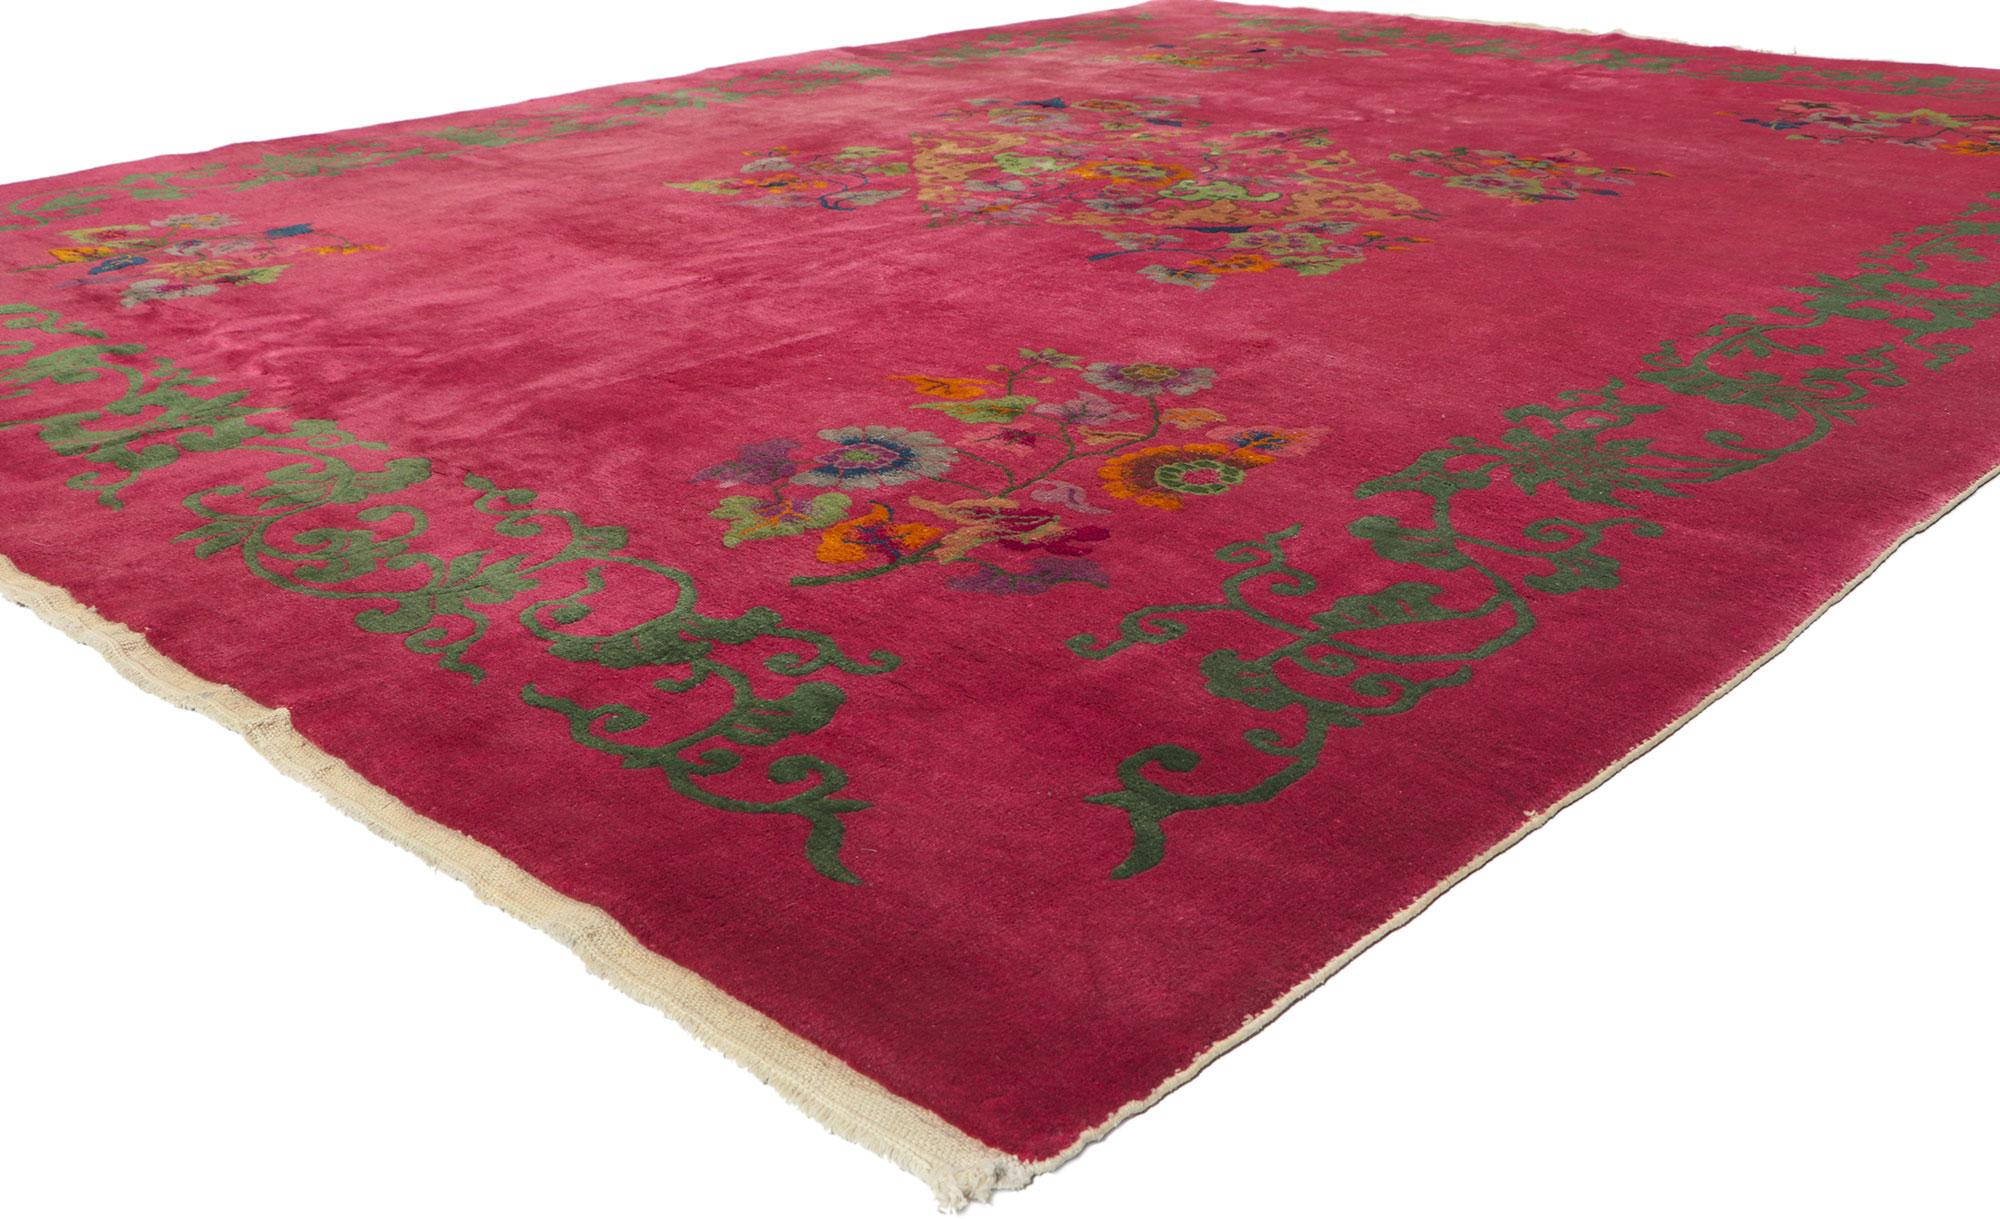 78301 Antique Chinese Art Deco Rug, 08'10 x 11'06.
​Emulating sensual decadence with maximalist style and lavish texture, this antique Chinese Art Deco rug cultivates a desire for bold and exotic. The intricate floral design and saturated jewel-tone